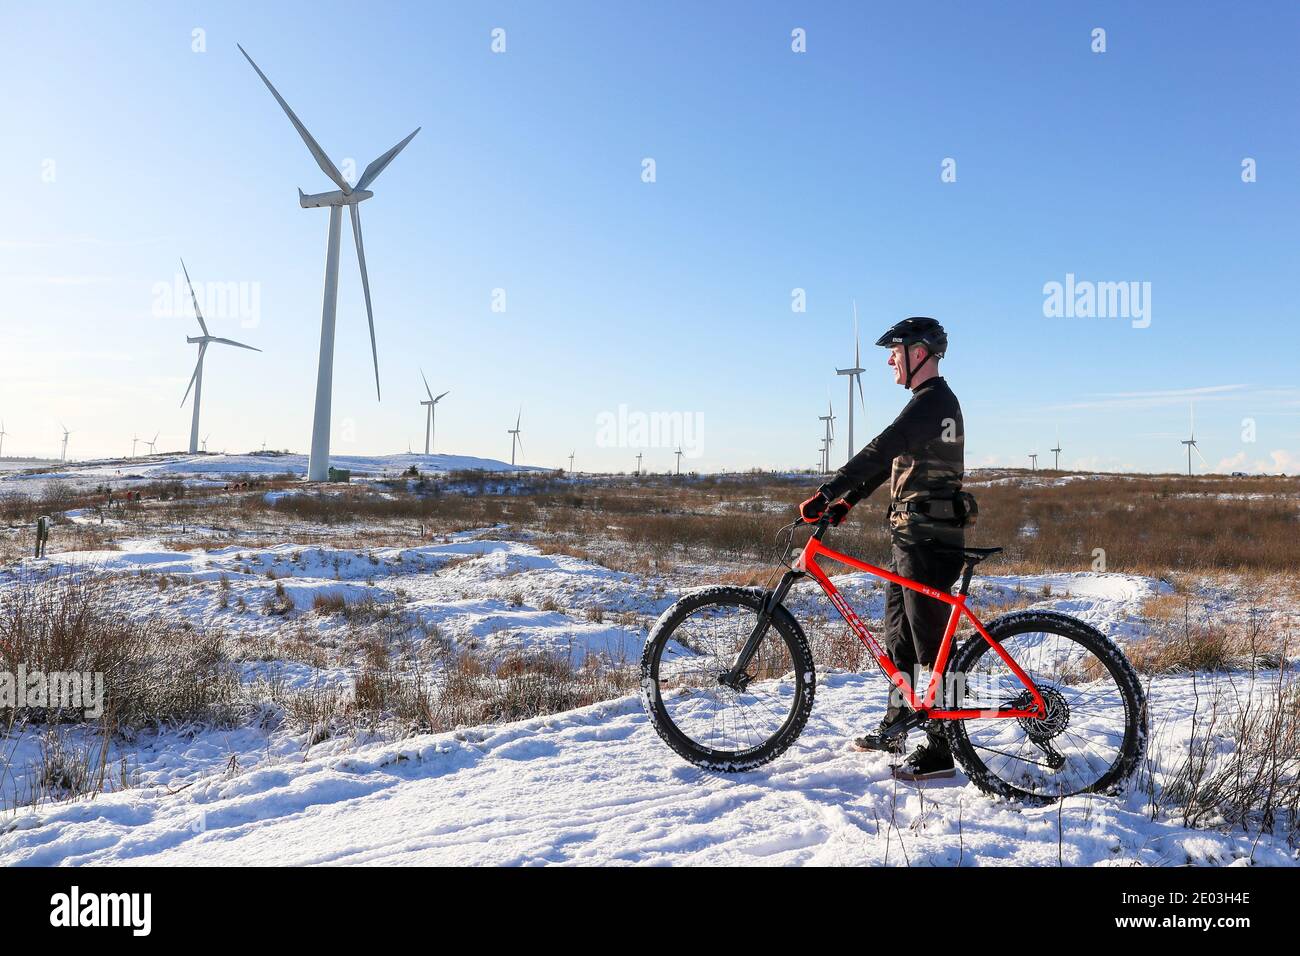 Whitelee Windfarm, Eaglesham Moor, near Glasgow, UK. After a heavy overnight snowfall, many people took to the access roads about Whitelee Windfarm, the largest in Europe, to get some exercise and still maintain safe social distancing. Whitelee is on the south side of Glasgow city on the edge of Eaglesham Moor and is the site for 215 wind turbines. Credit: Findlay/Alamy Live News Stock Photo